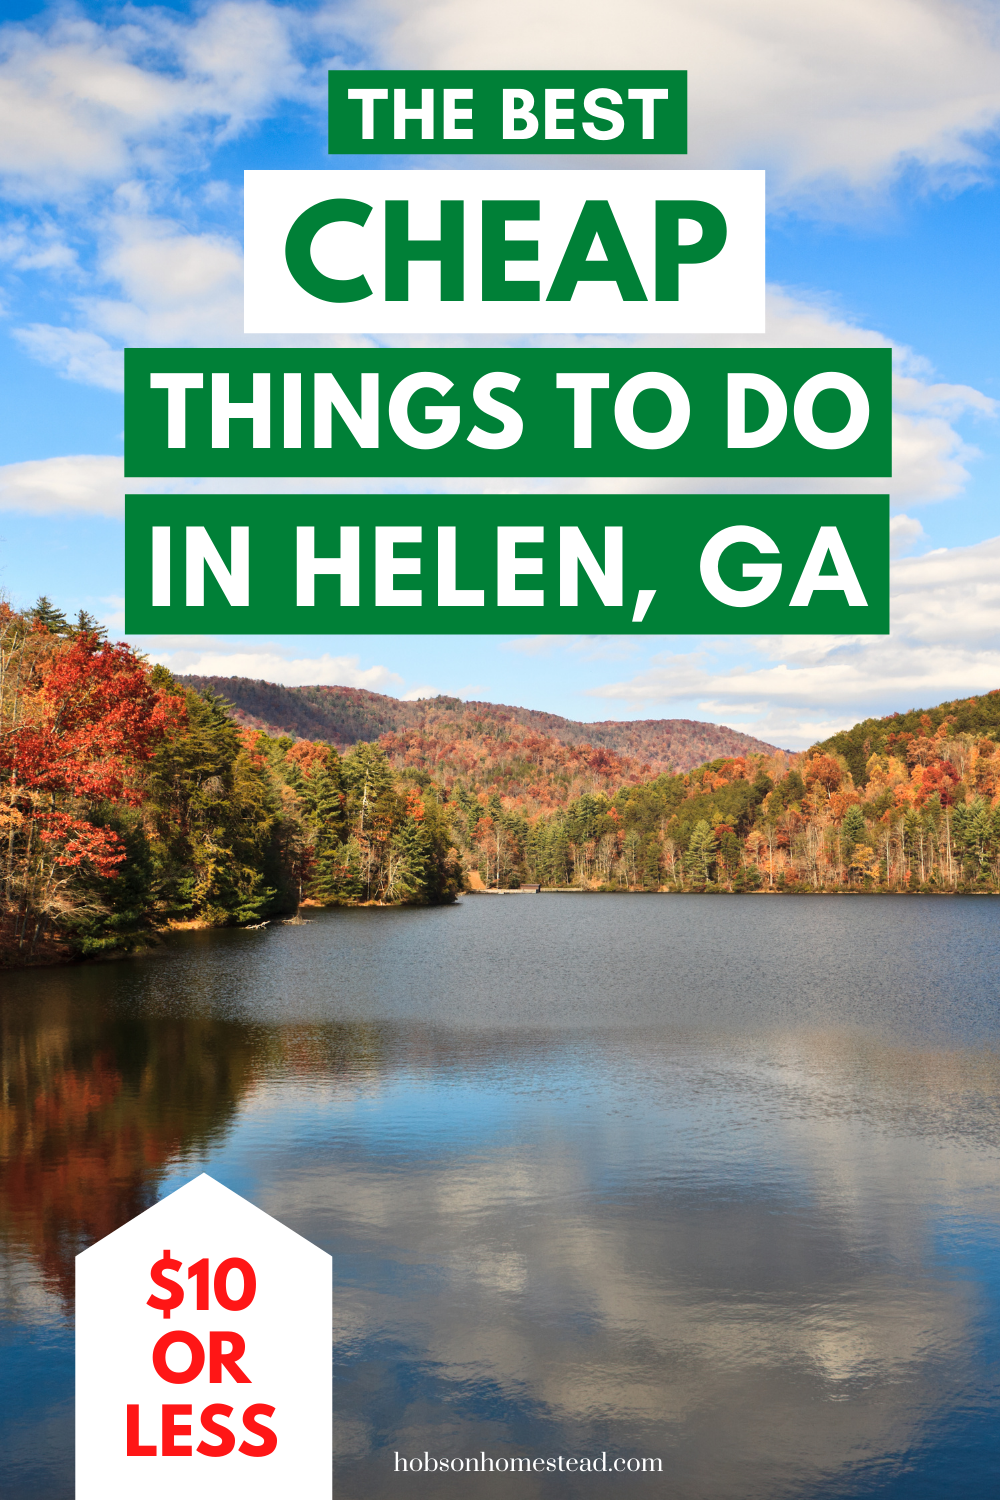 The Best Cheap Things to Do in Helen, Georgia